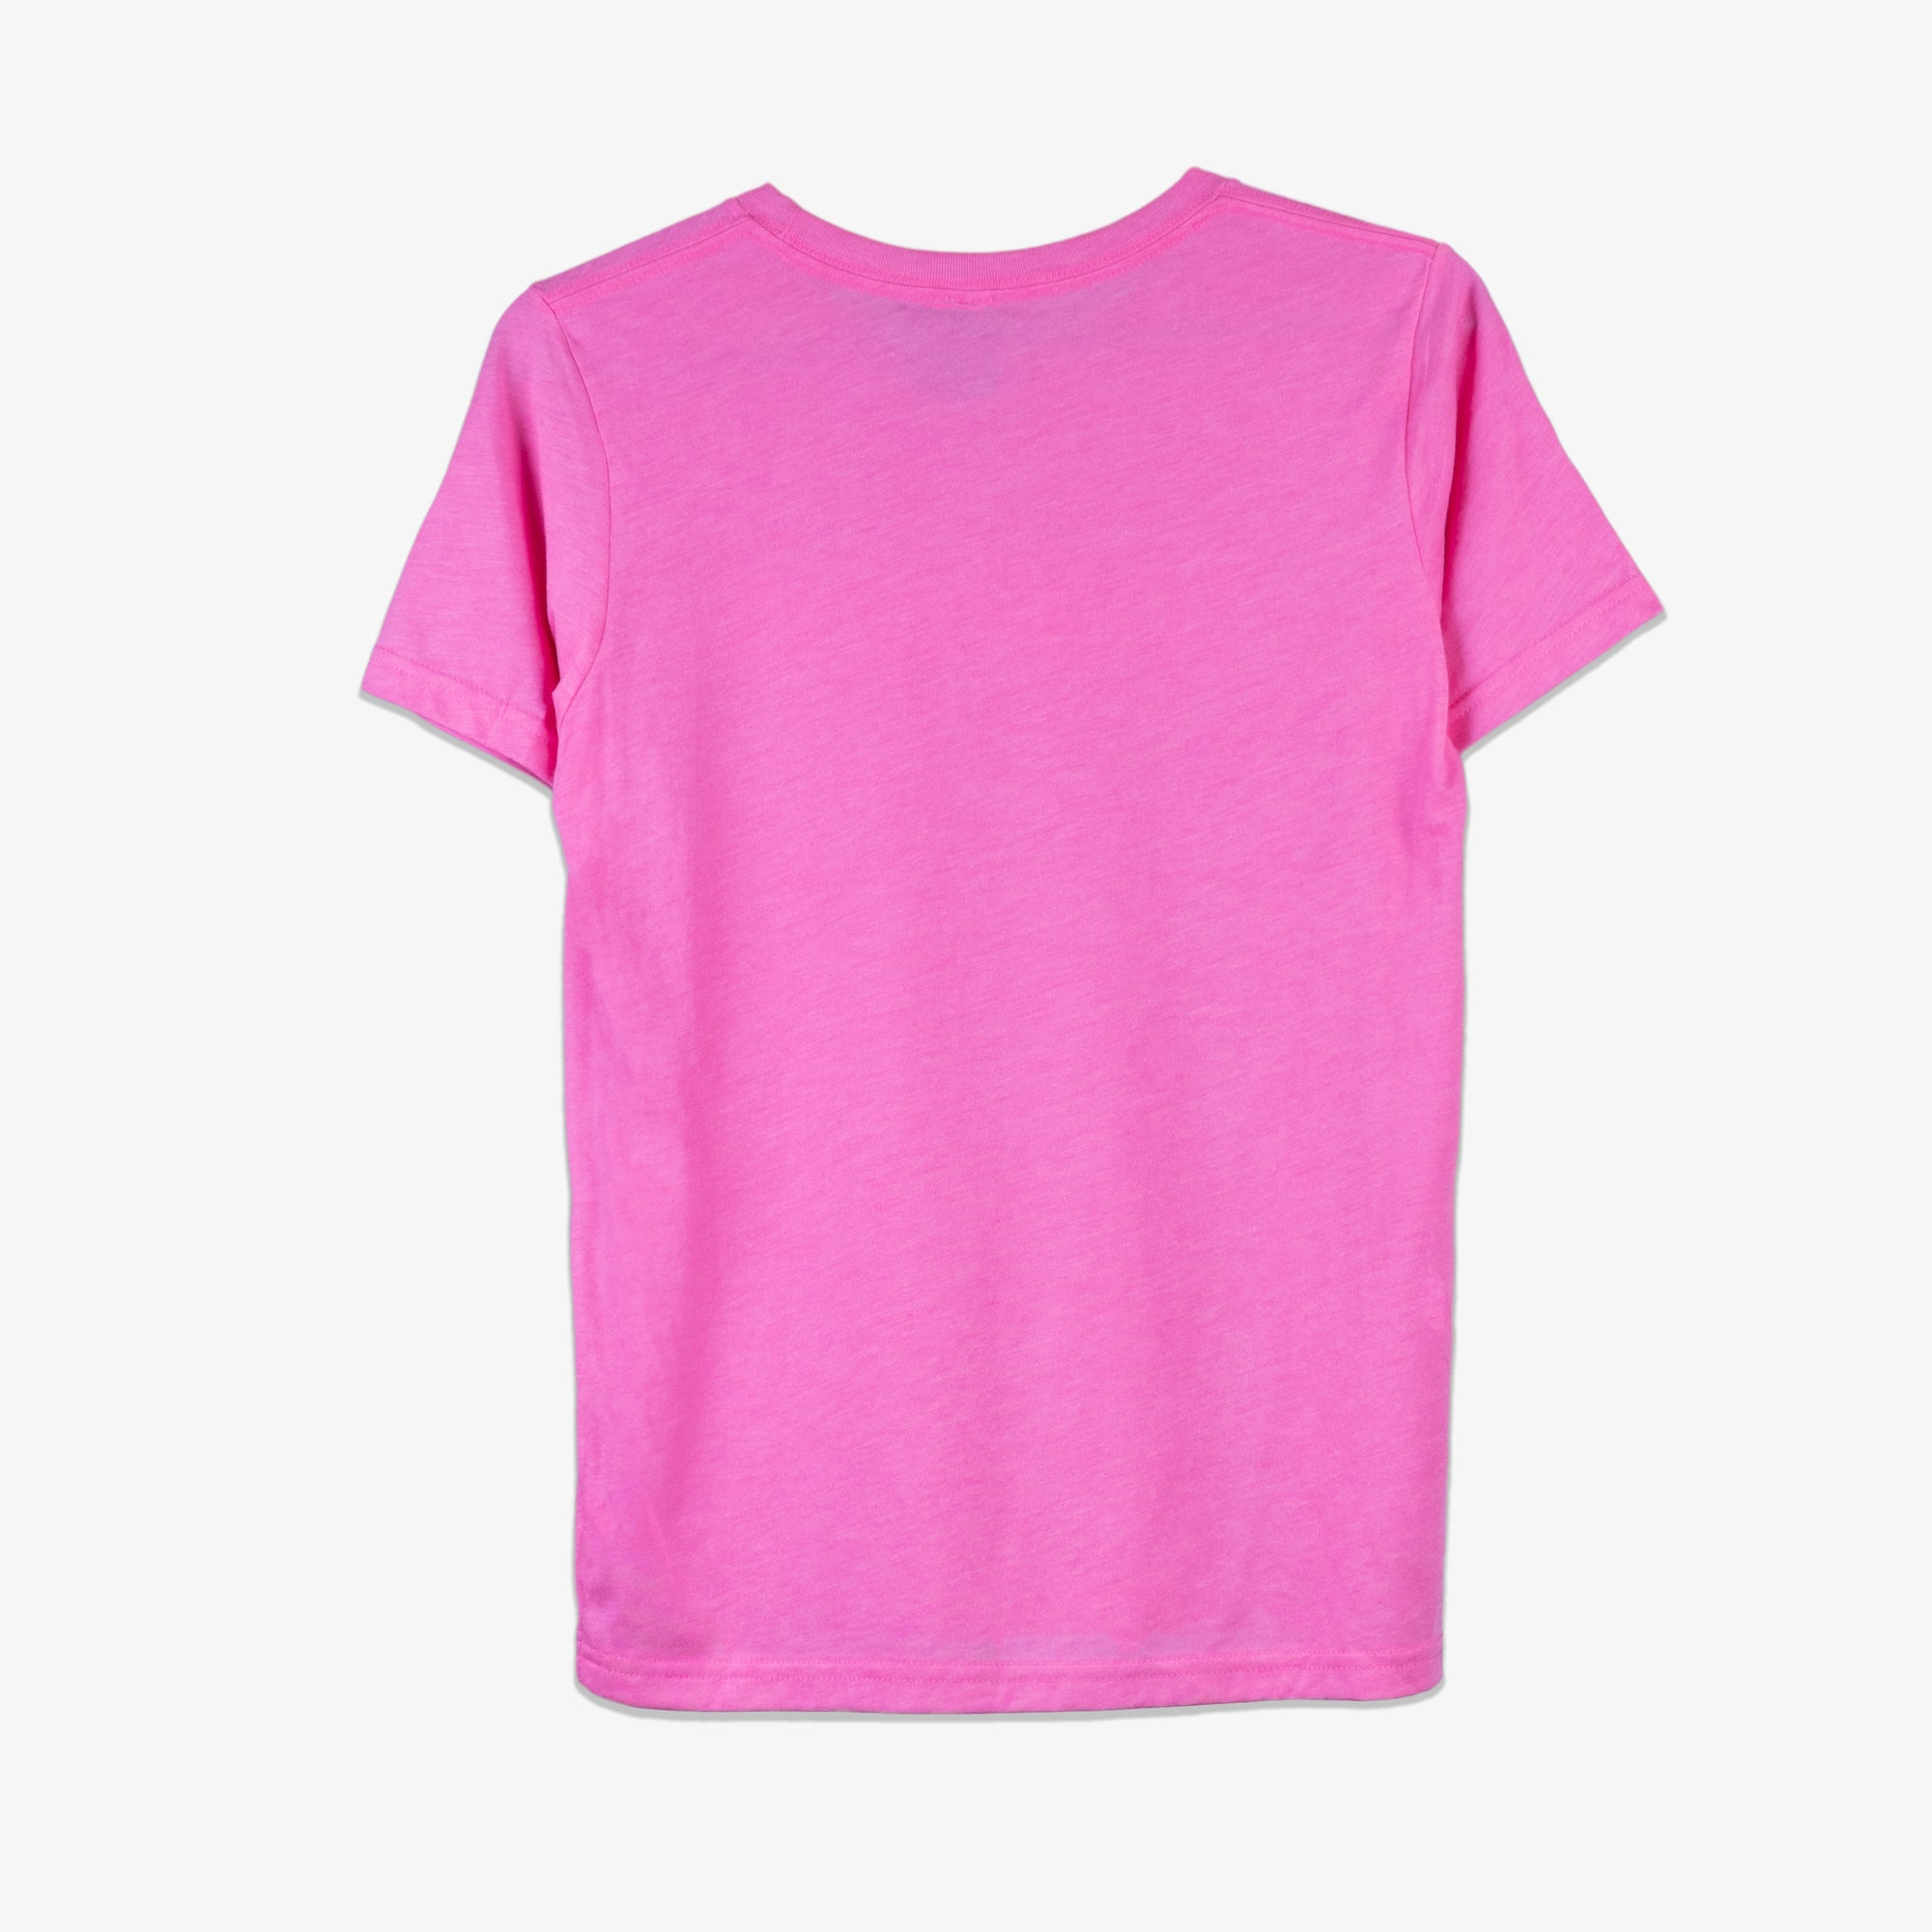 YOUTH PINK FONT 40 TEE